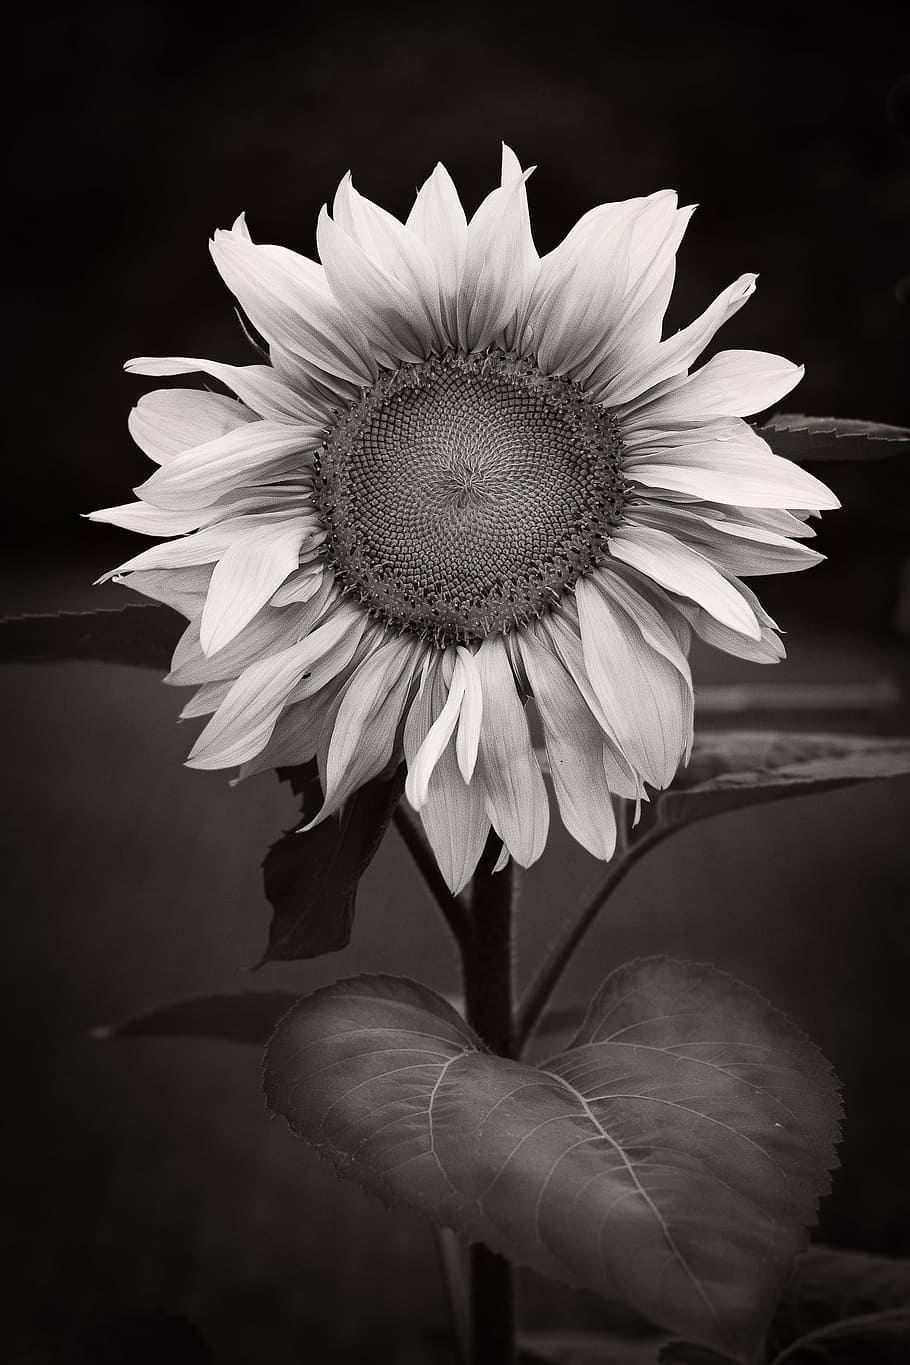 Royalty-free black and white sunflower photos free download | Pxfuel